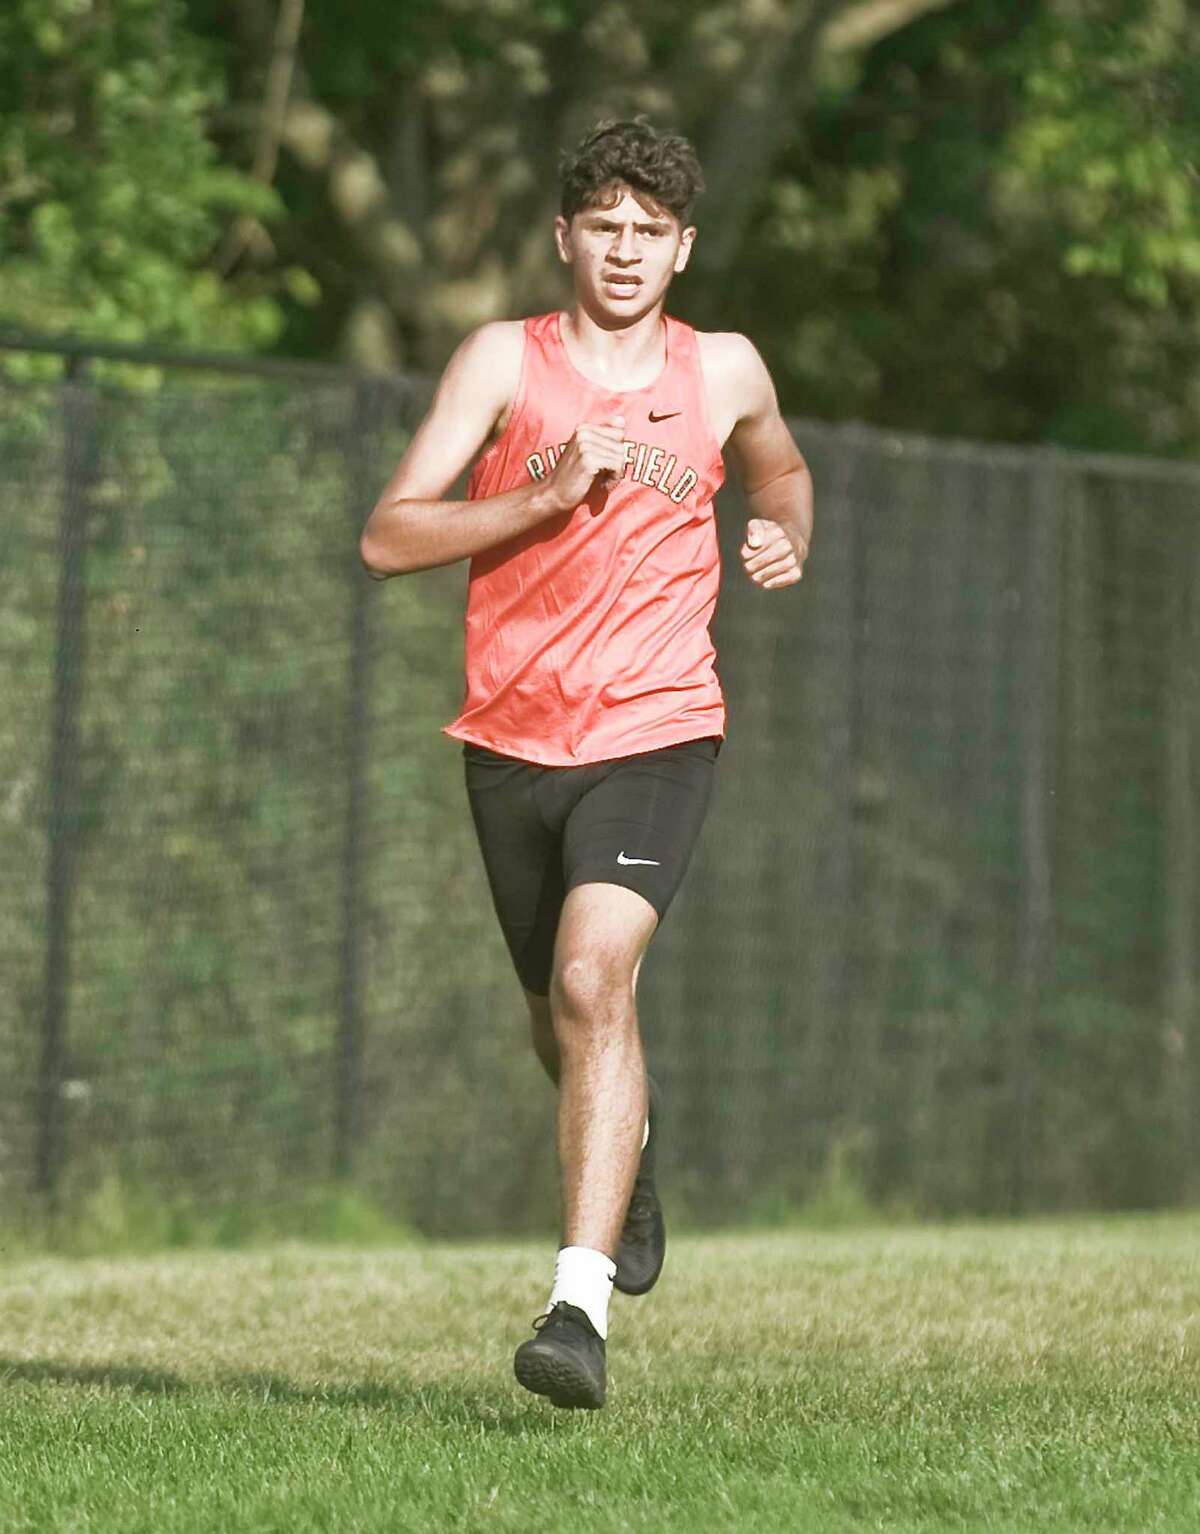 Jon-Paul Karpf was the top finisher for the RHS boys cross country team in Monday's opening meet. Karpf, a sophomore, was second overall.